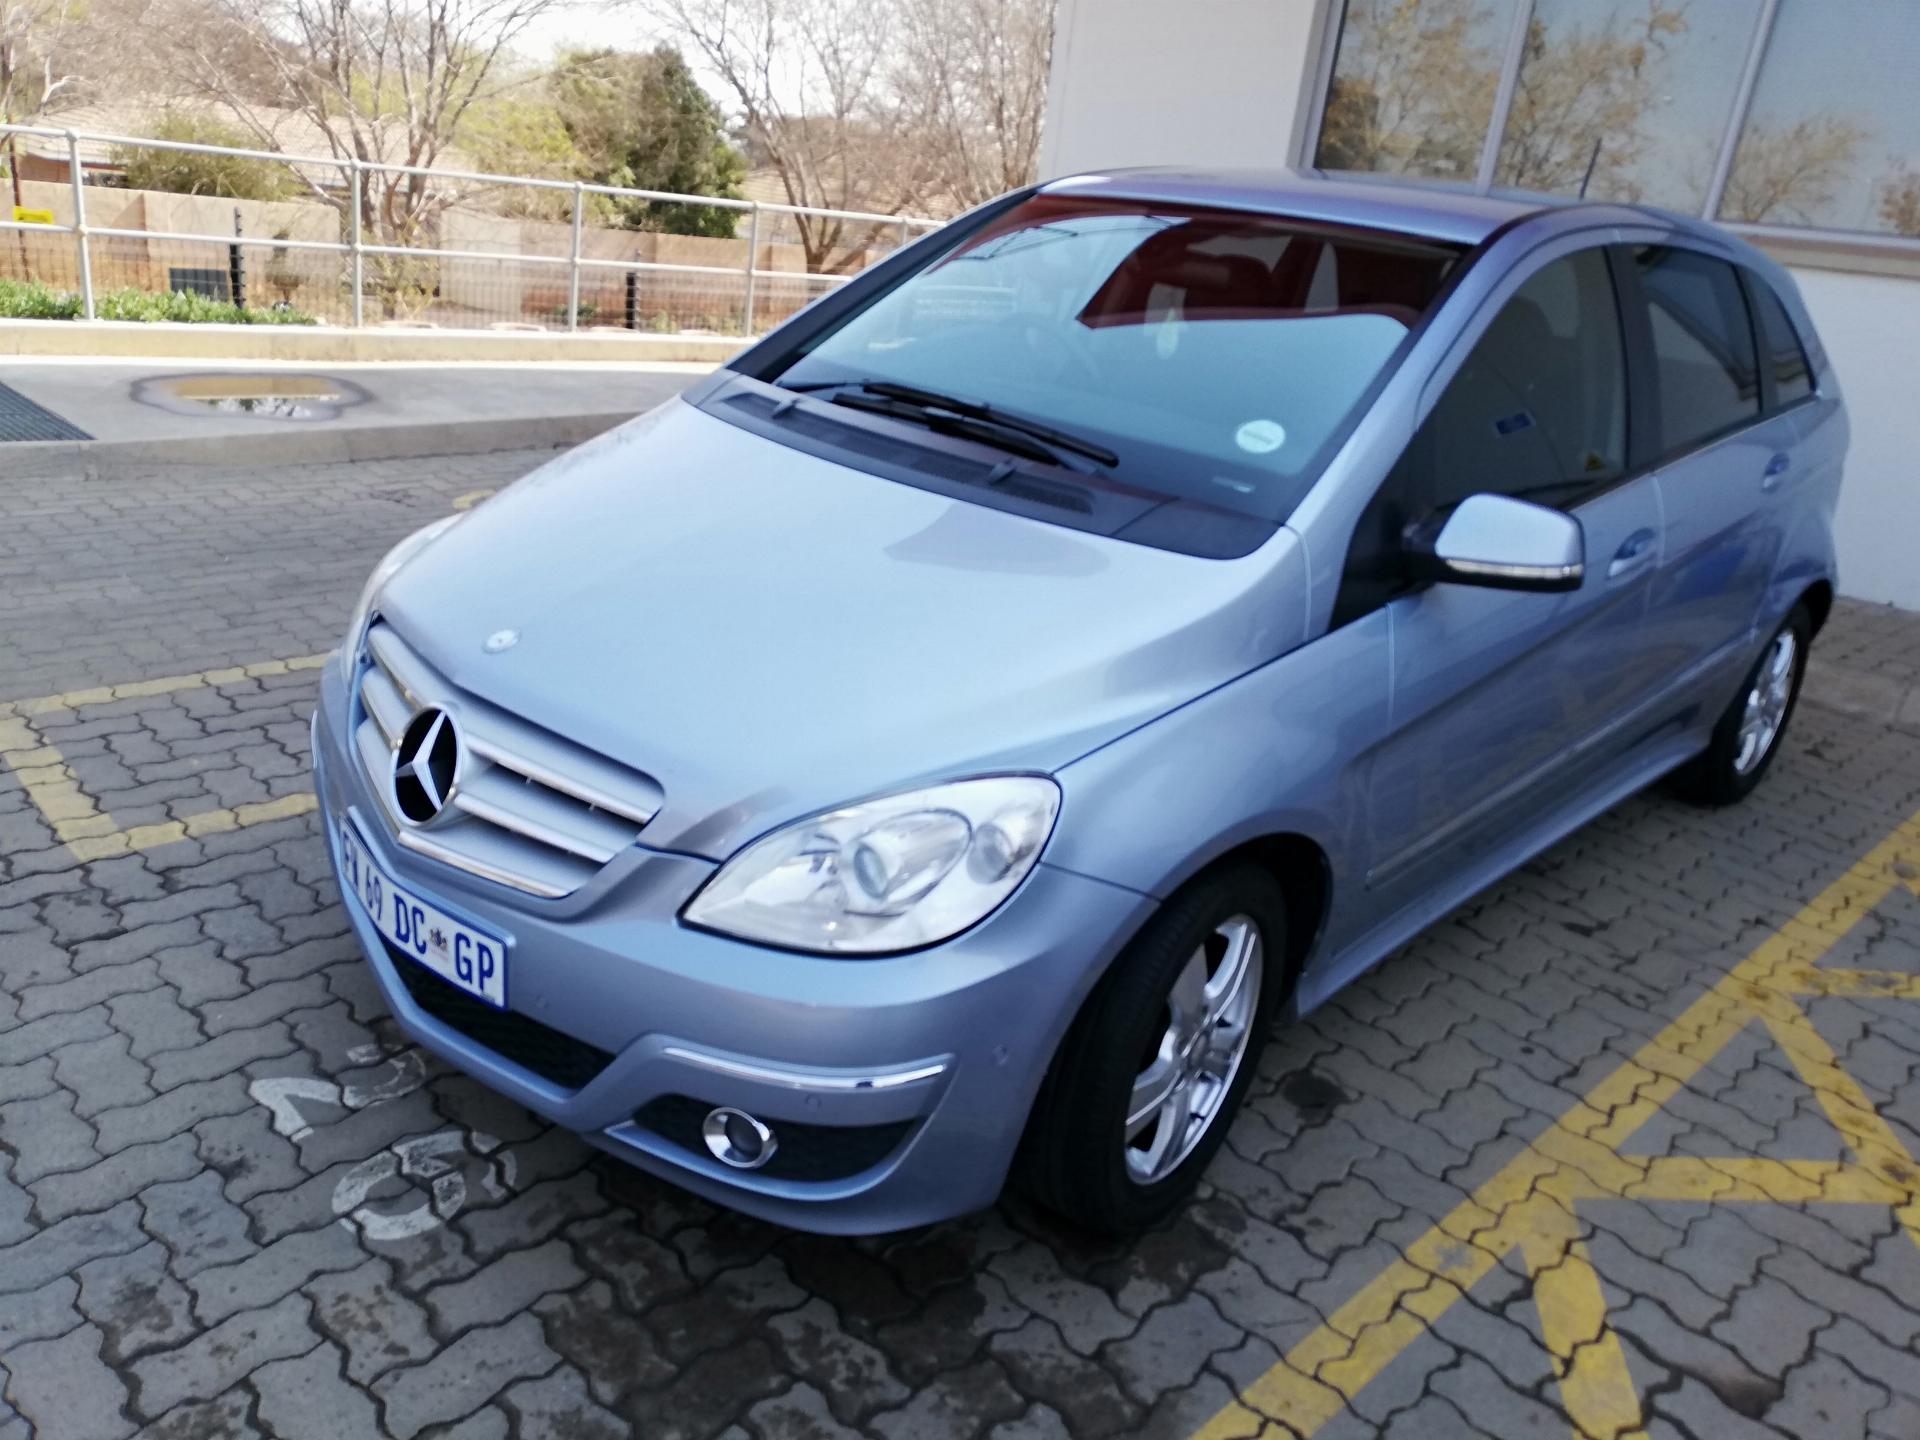 Used Mercedes Benz B Class B200 Turbo A/T 2010 on auction - MC1908060011